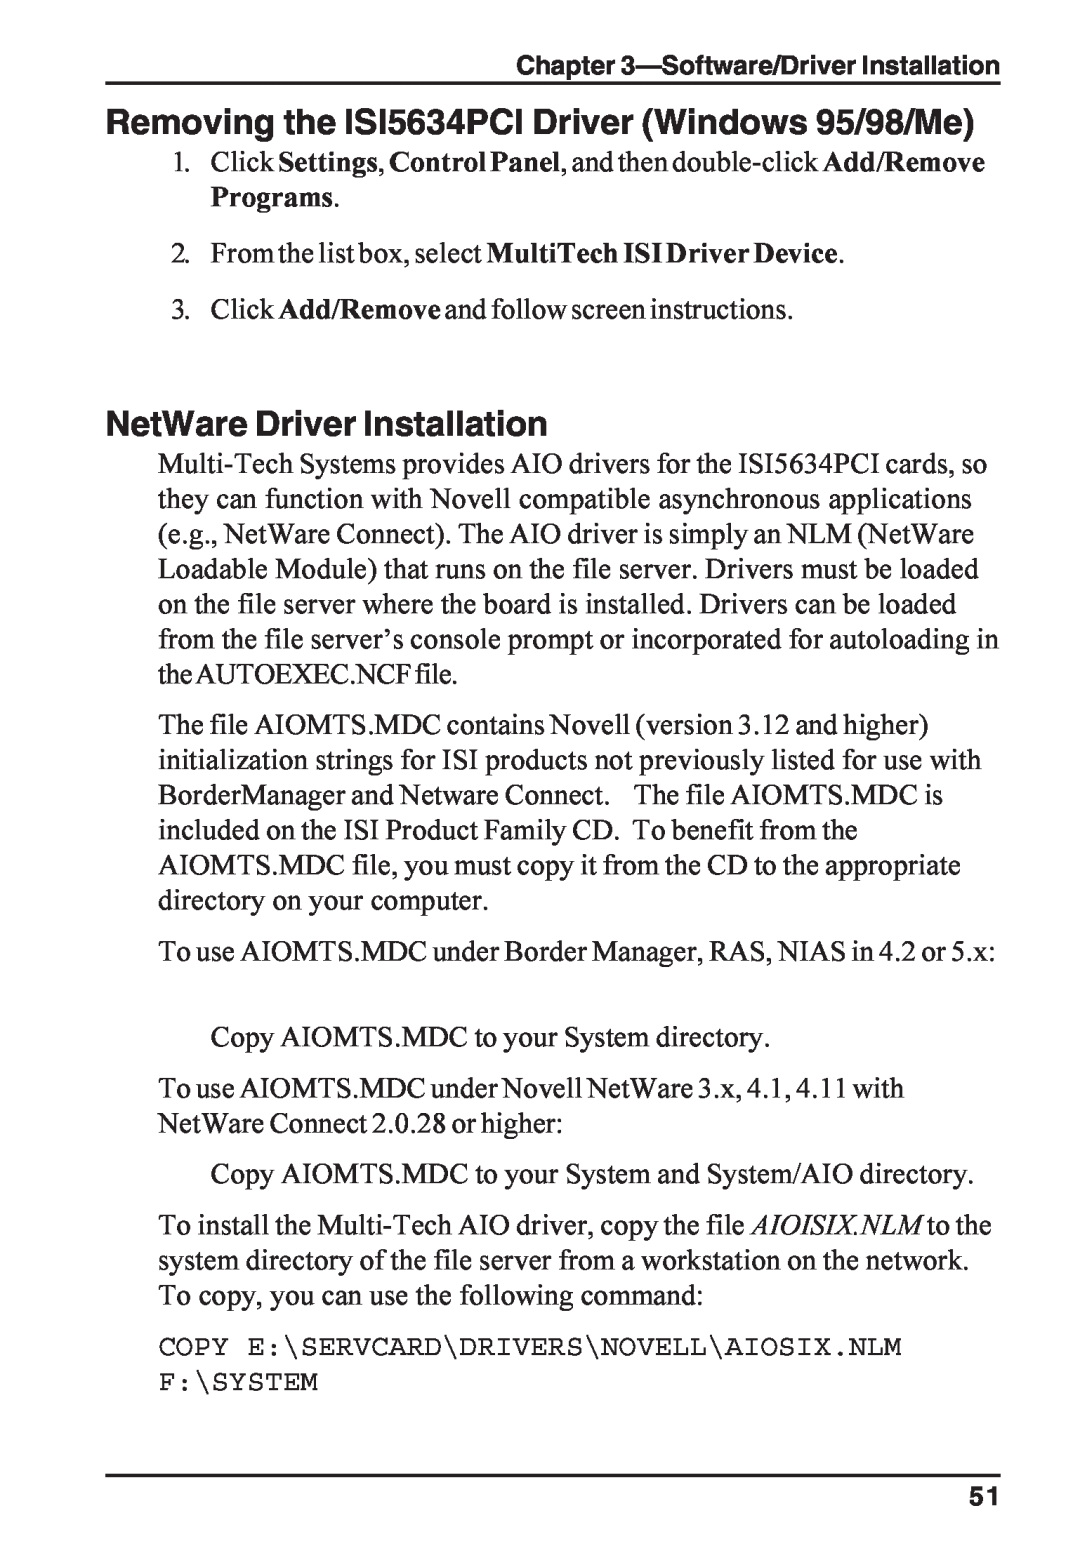 Multi-Tech Systems ISI5634PCI/4/8 manual Removing the ISI5634PCI Driver Windows 95/98/Me, NetWare Driver Installation 